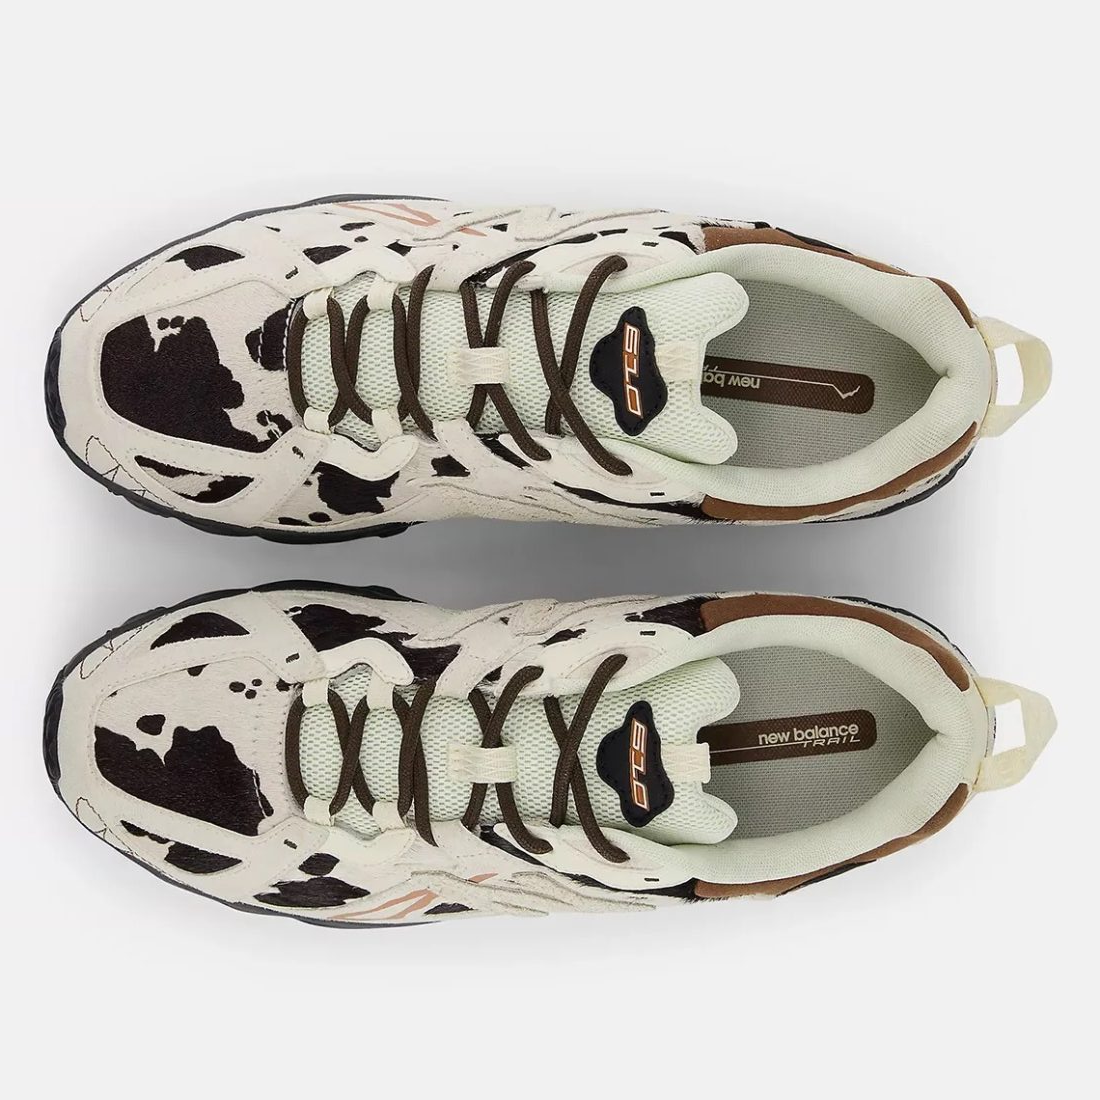 New Balance's 610 shoe in a cow print pattern